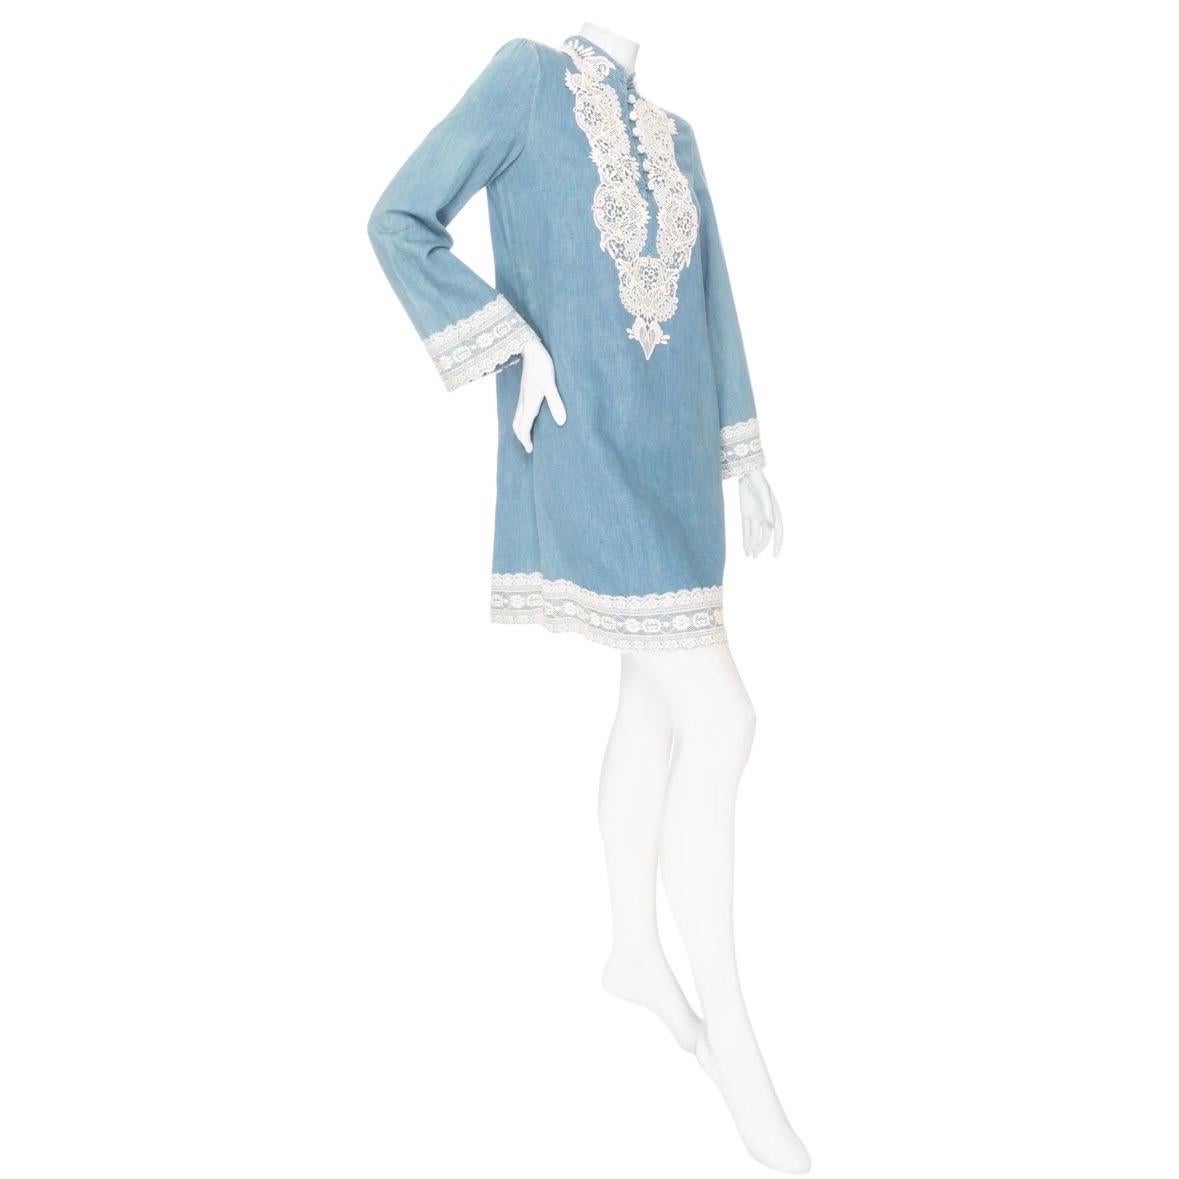 Gucci Blue Cotton-Linen Chambray and Lace Tunic Dress 

Blue/White
Chambray fabric
Lace appliqué trim
Long bell sleeves
Tunic neckline with button fastening
Shift silhouette
Mini length
Made in Italy
65% cotton, 35% linen fabric, 76% cotton, 24%